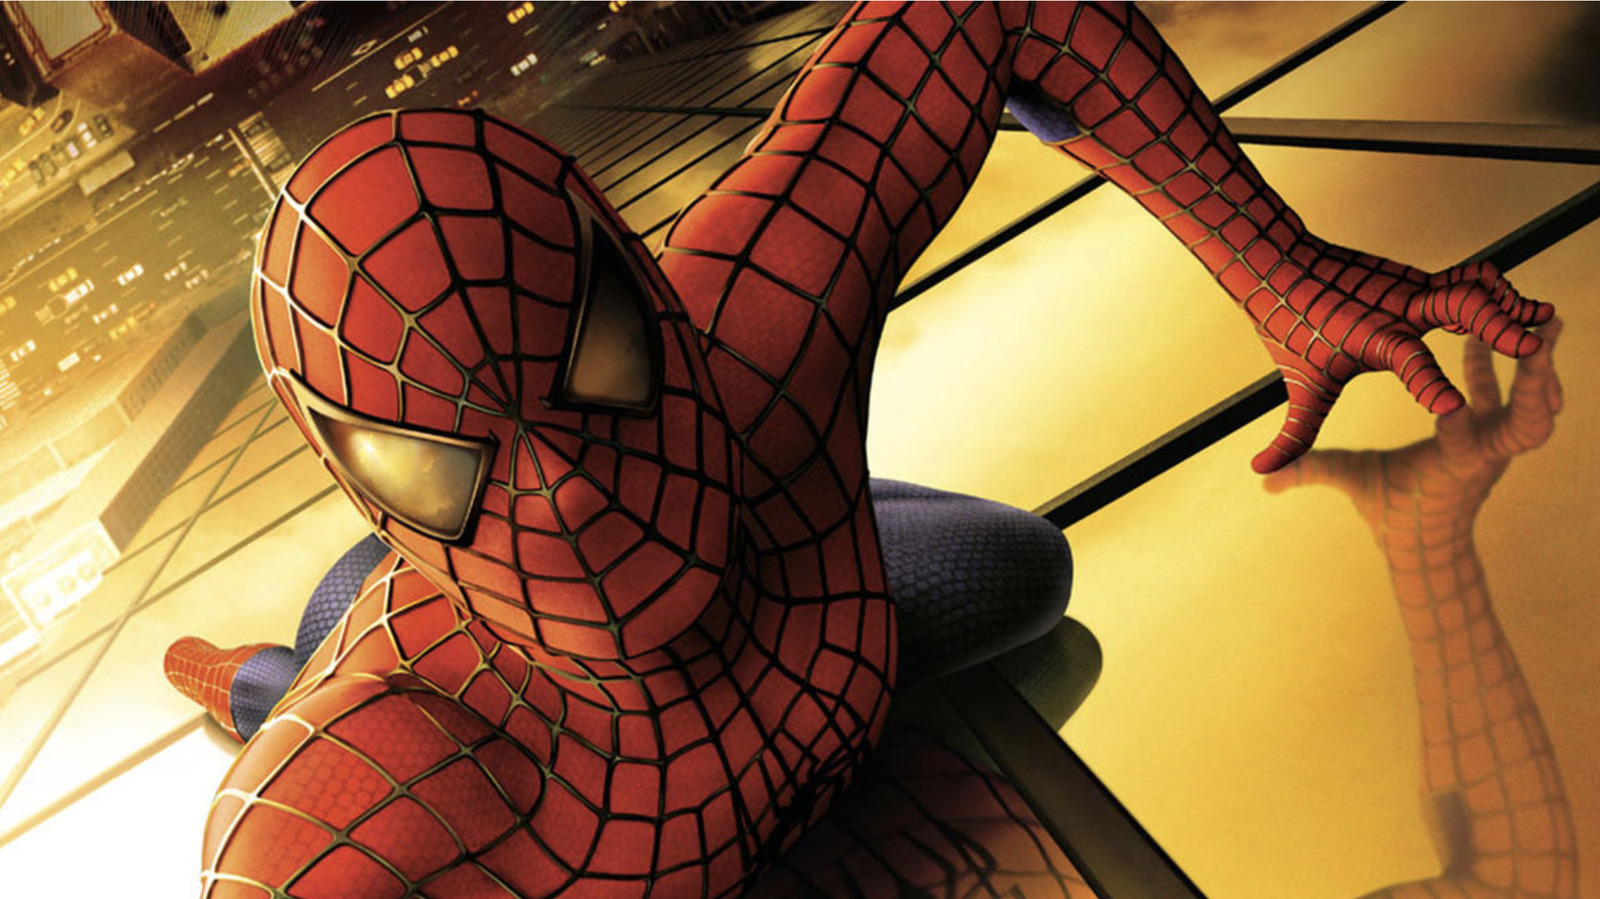 Danny Elfman's Score For Sam Raimi's Spider-Man Is Finally Coming To Vinyl